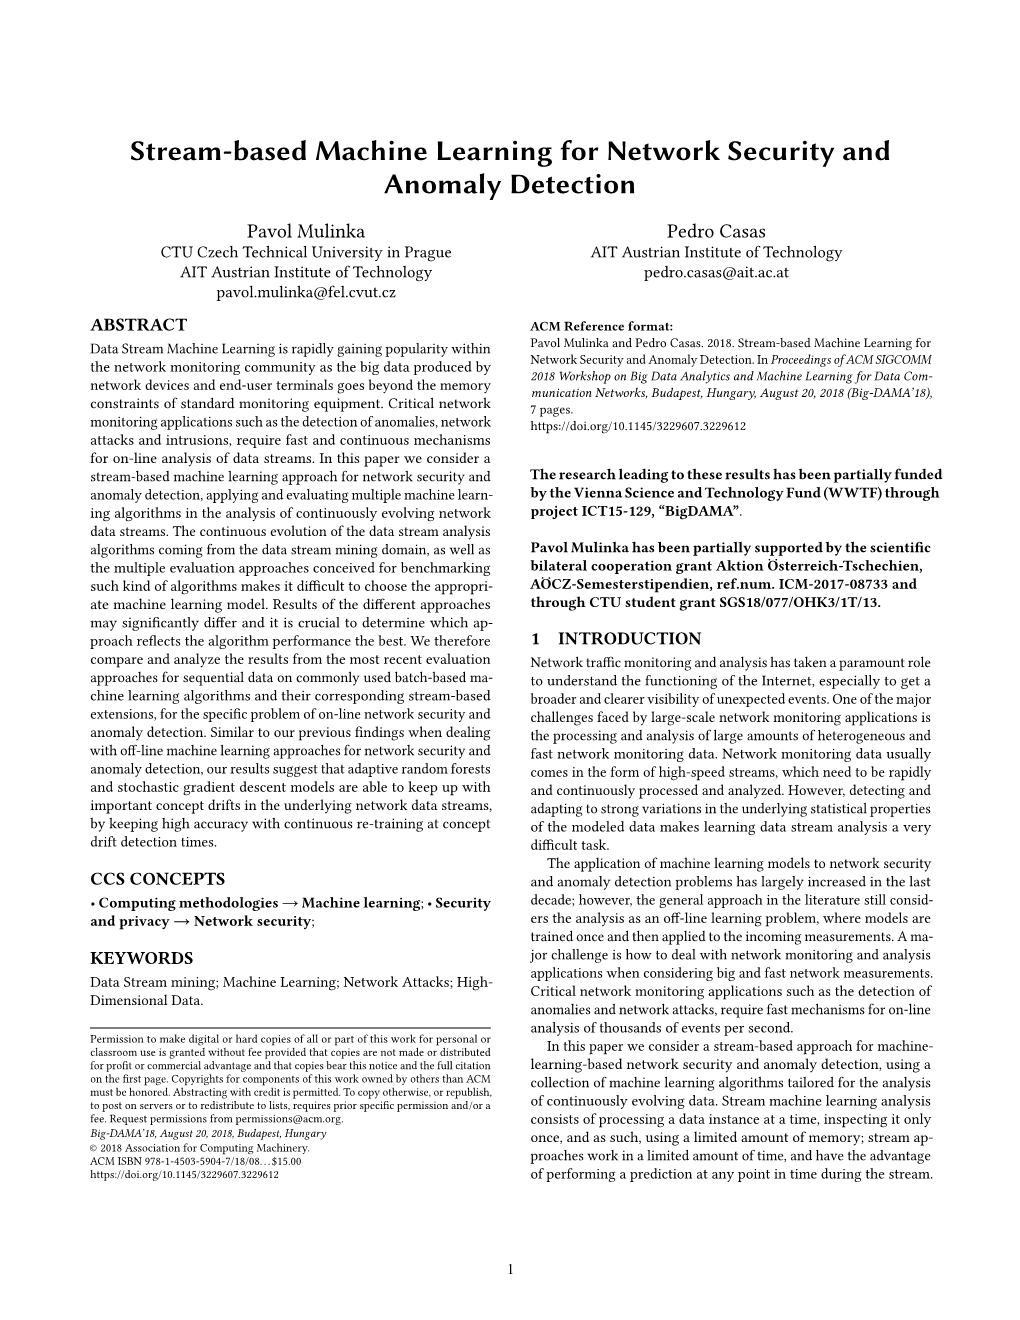 Stream-Based Machine Learning for Network Security and Anomaly Detection